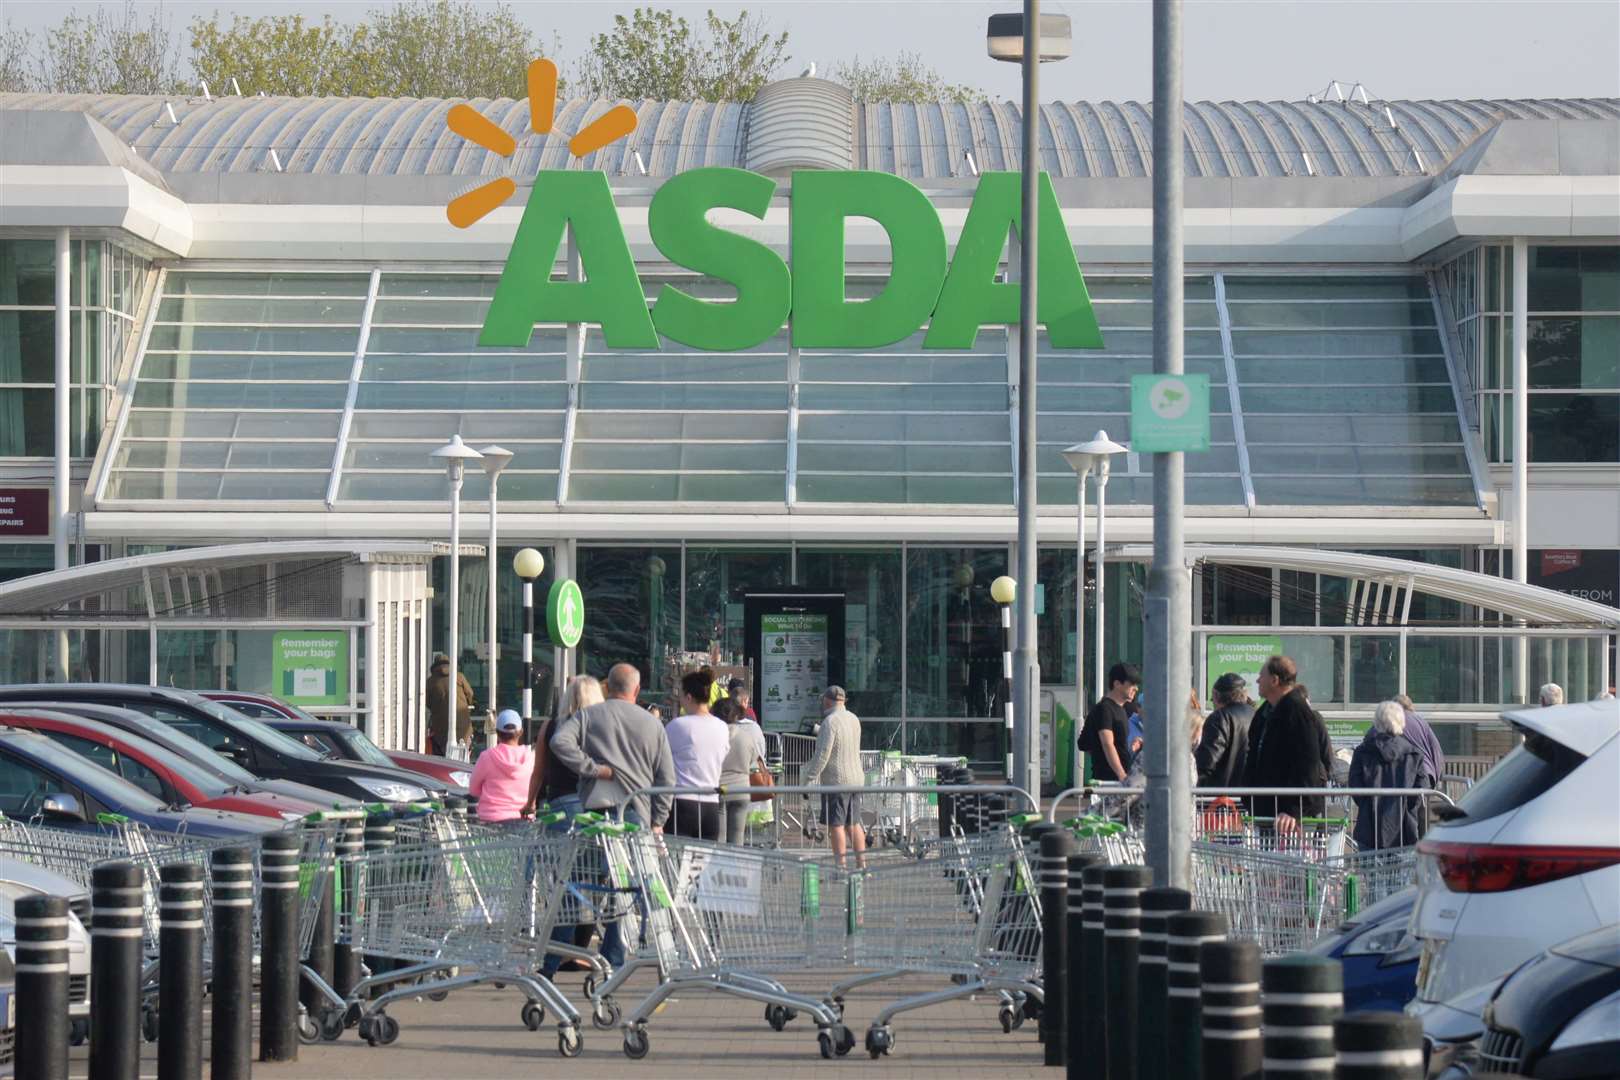 The Asda store in Sturry Road, Canterbury